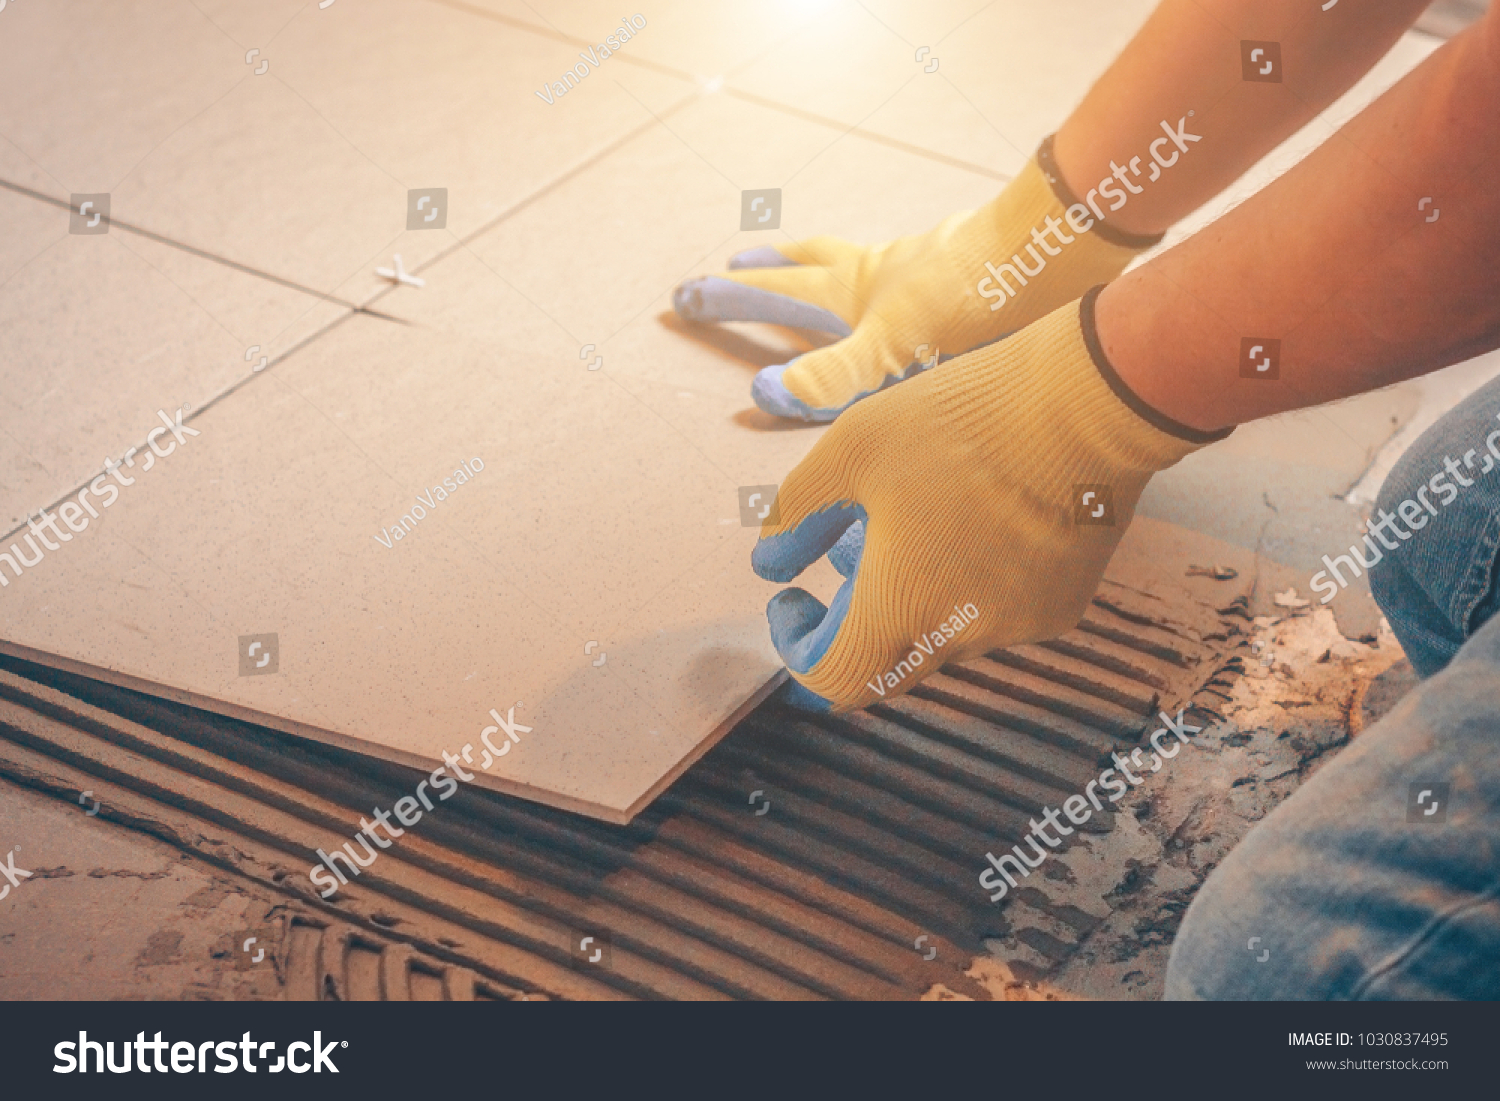 The tile glues the tile to the floor with a glue applied by a notched trowel #1030837495